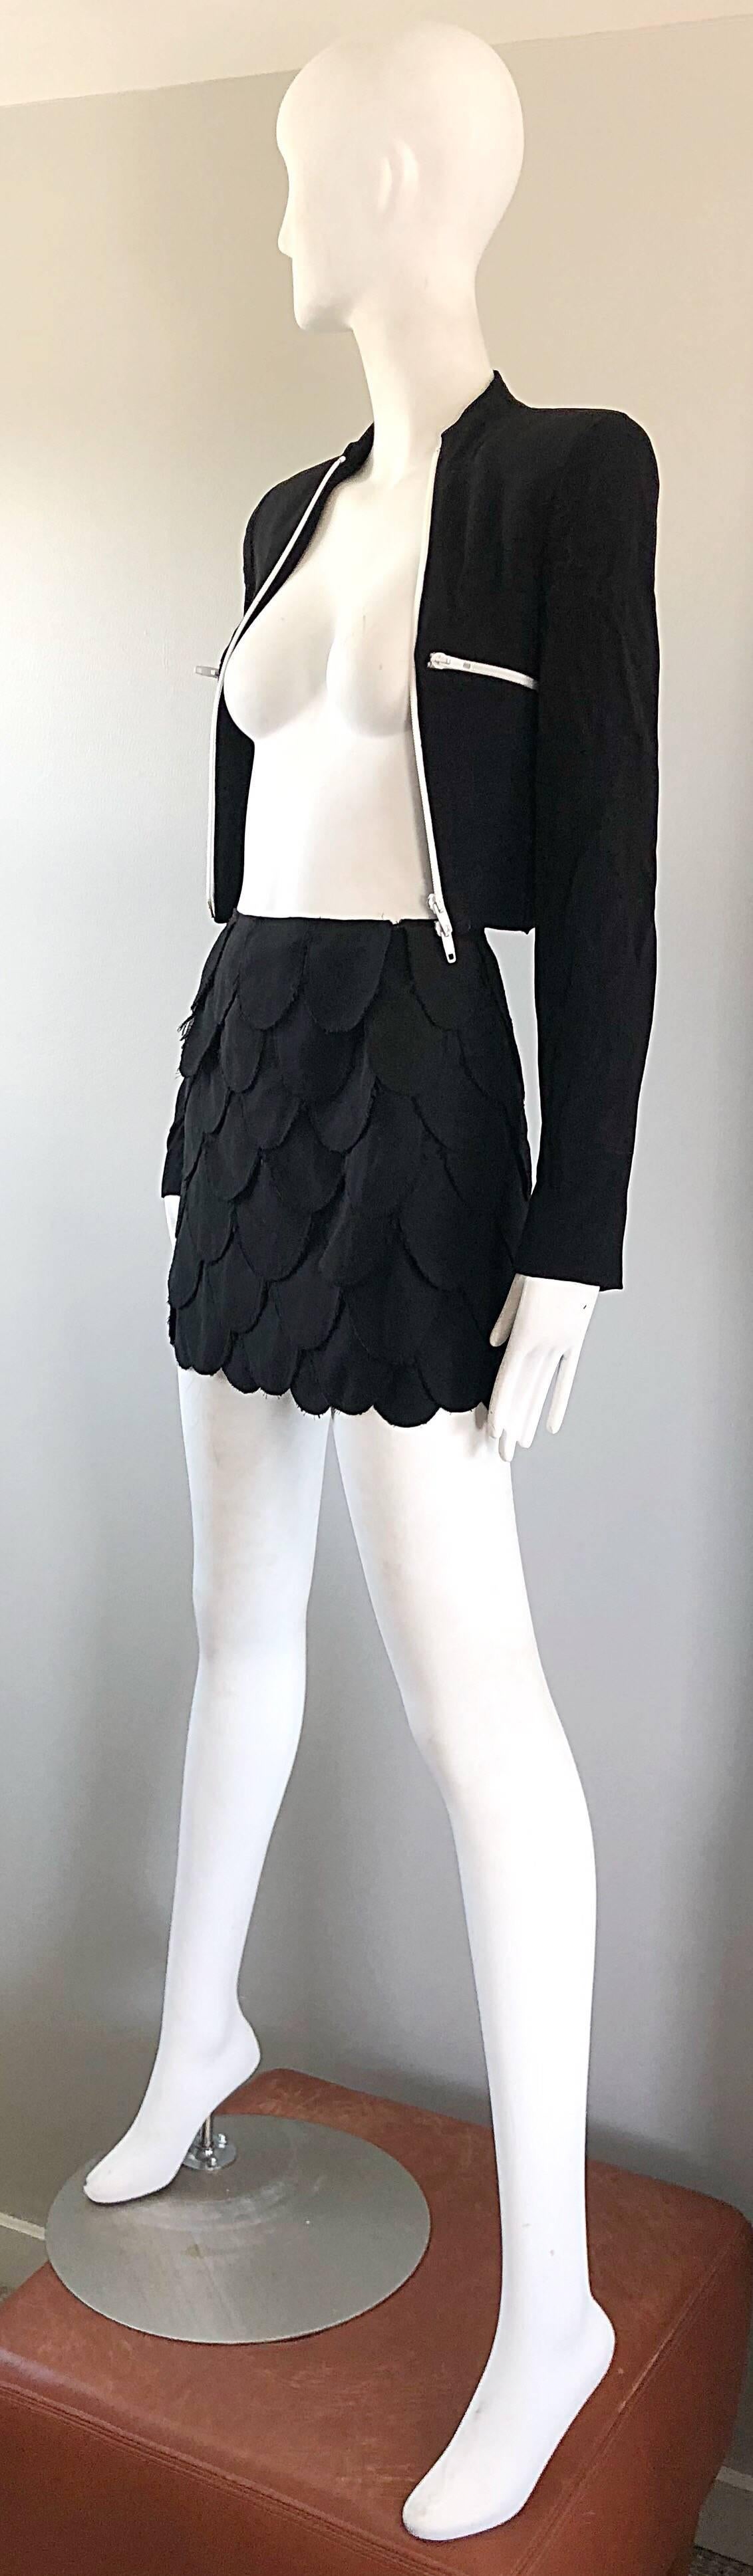 Moschino Cheap & Chic Vintage 90s Black Size 4 Carwash Fringe Mini Skirt For Sale 2